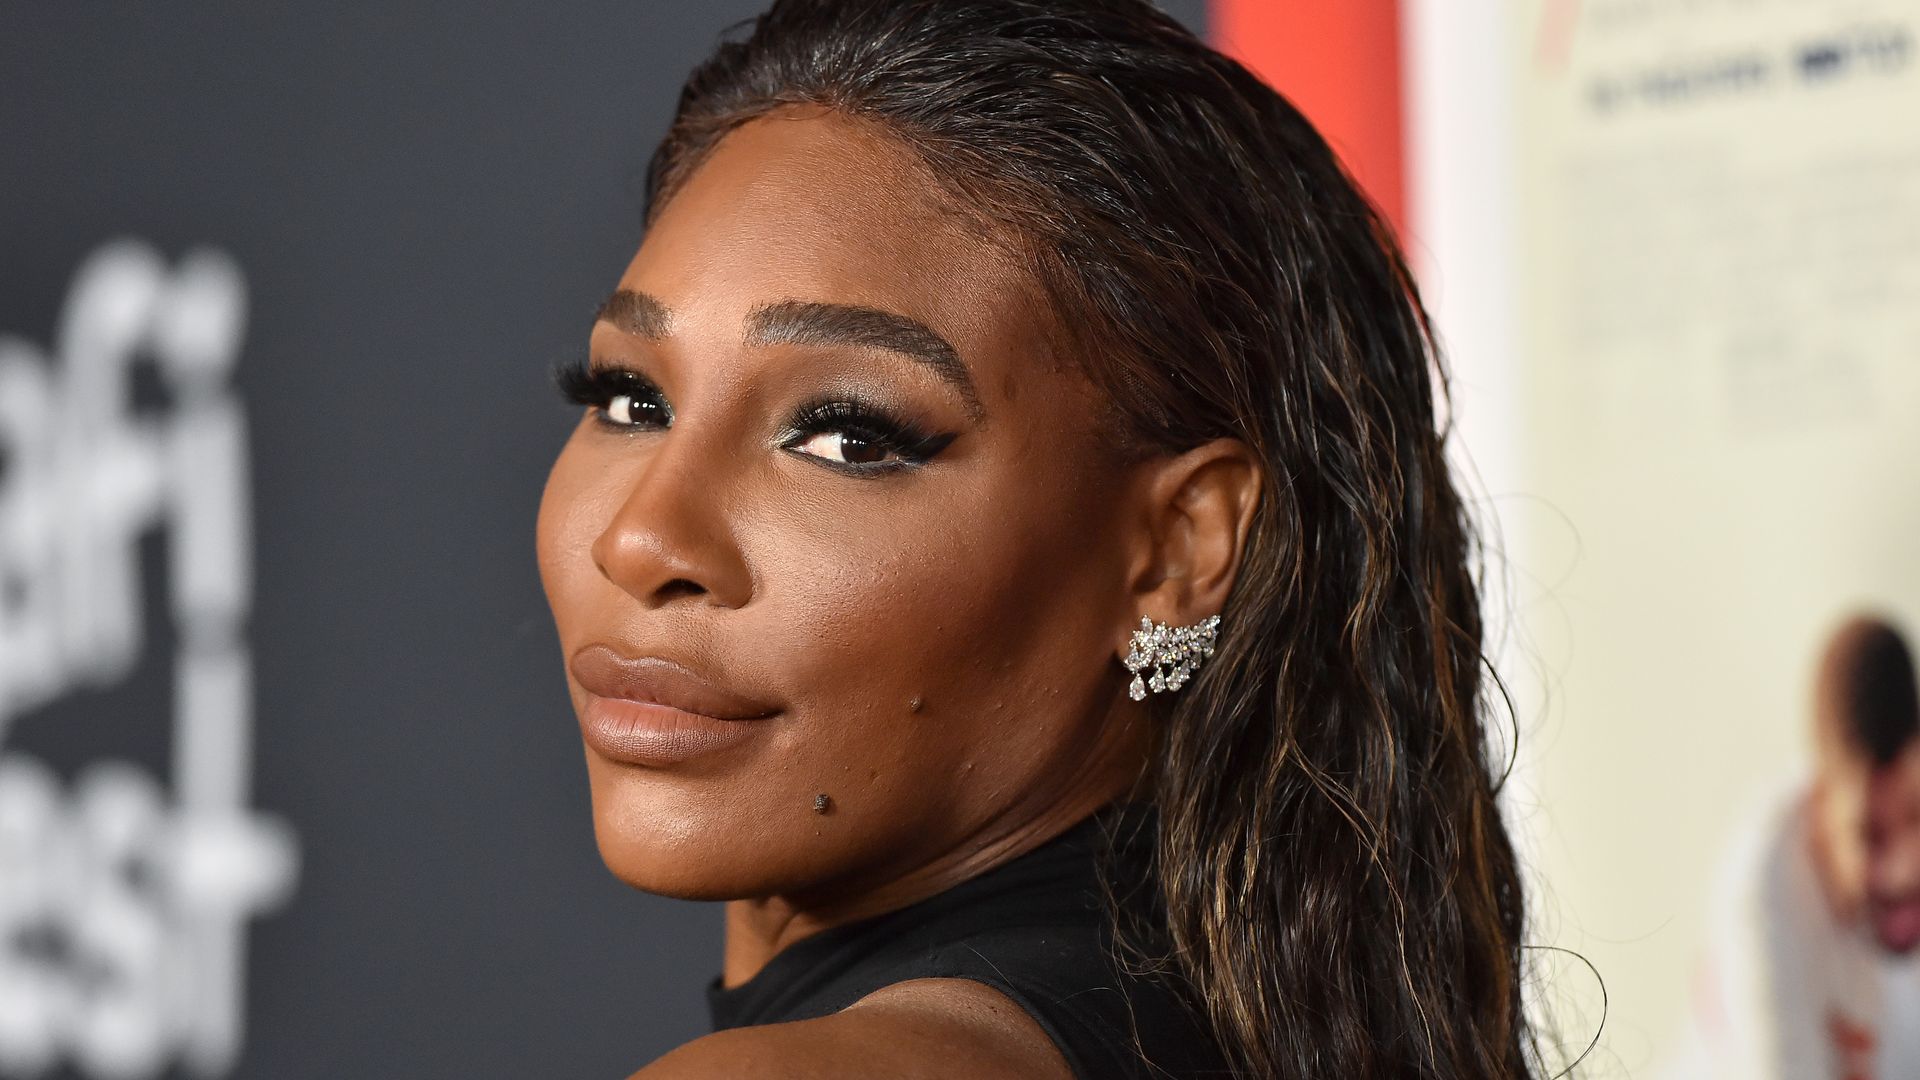 Serena Williams attends the 2021 AFI Fest - Closing Night Premiere of Warner Bros. "King Richard" at TCL Chinese Theatre on November 14, 2021 in Hollywood, California.